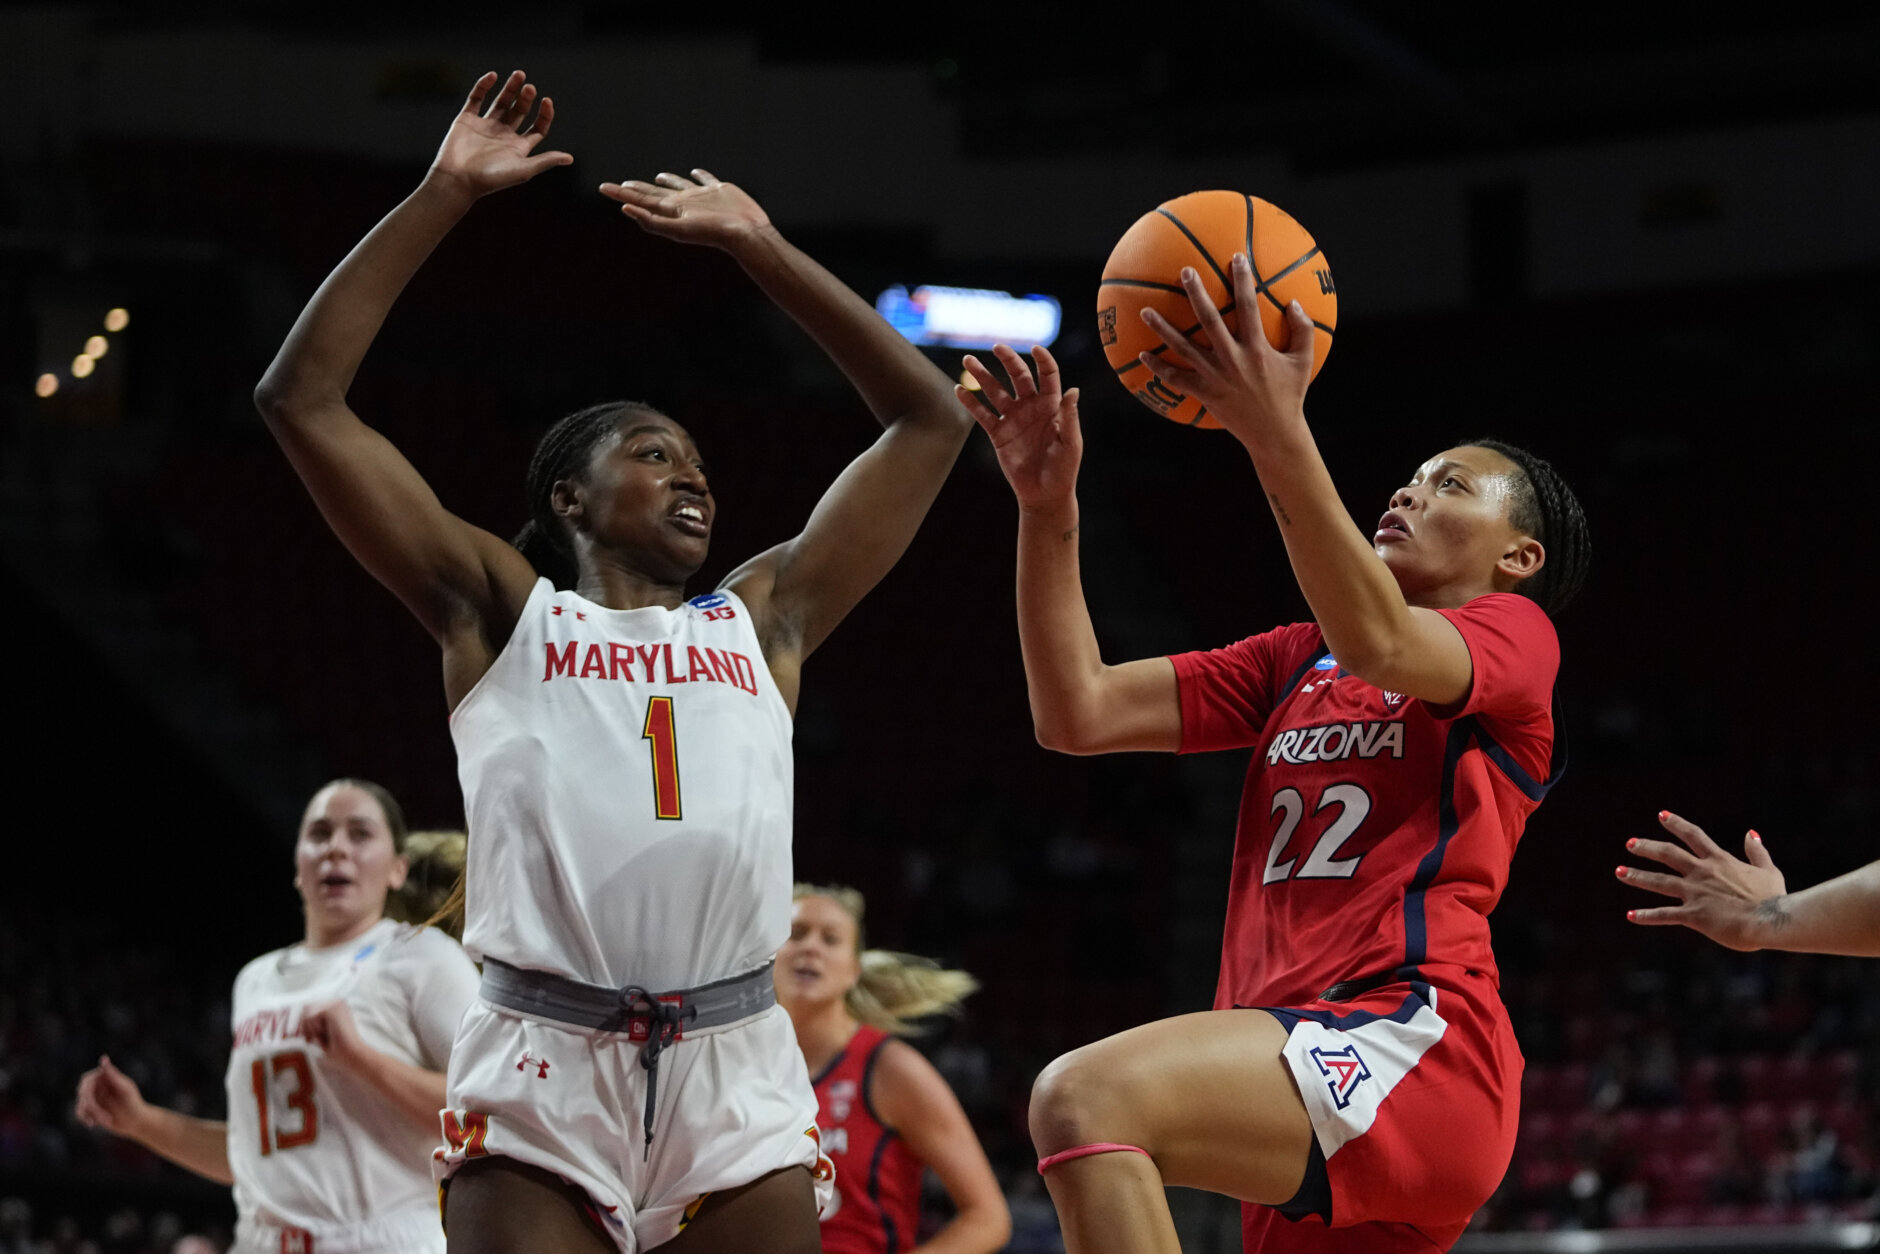 Maryland into womens Sweet 16 after 77-64 win over Arizona